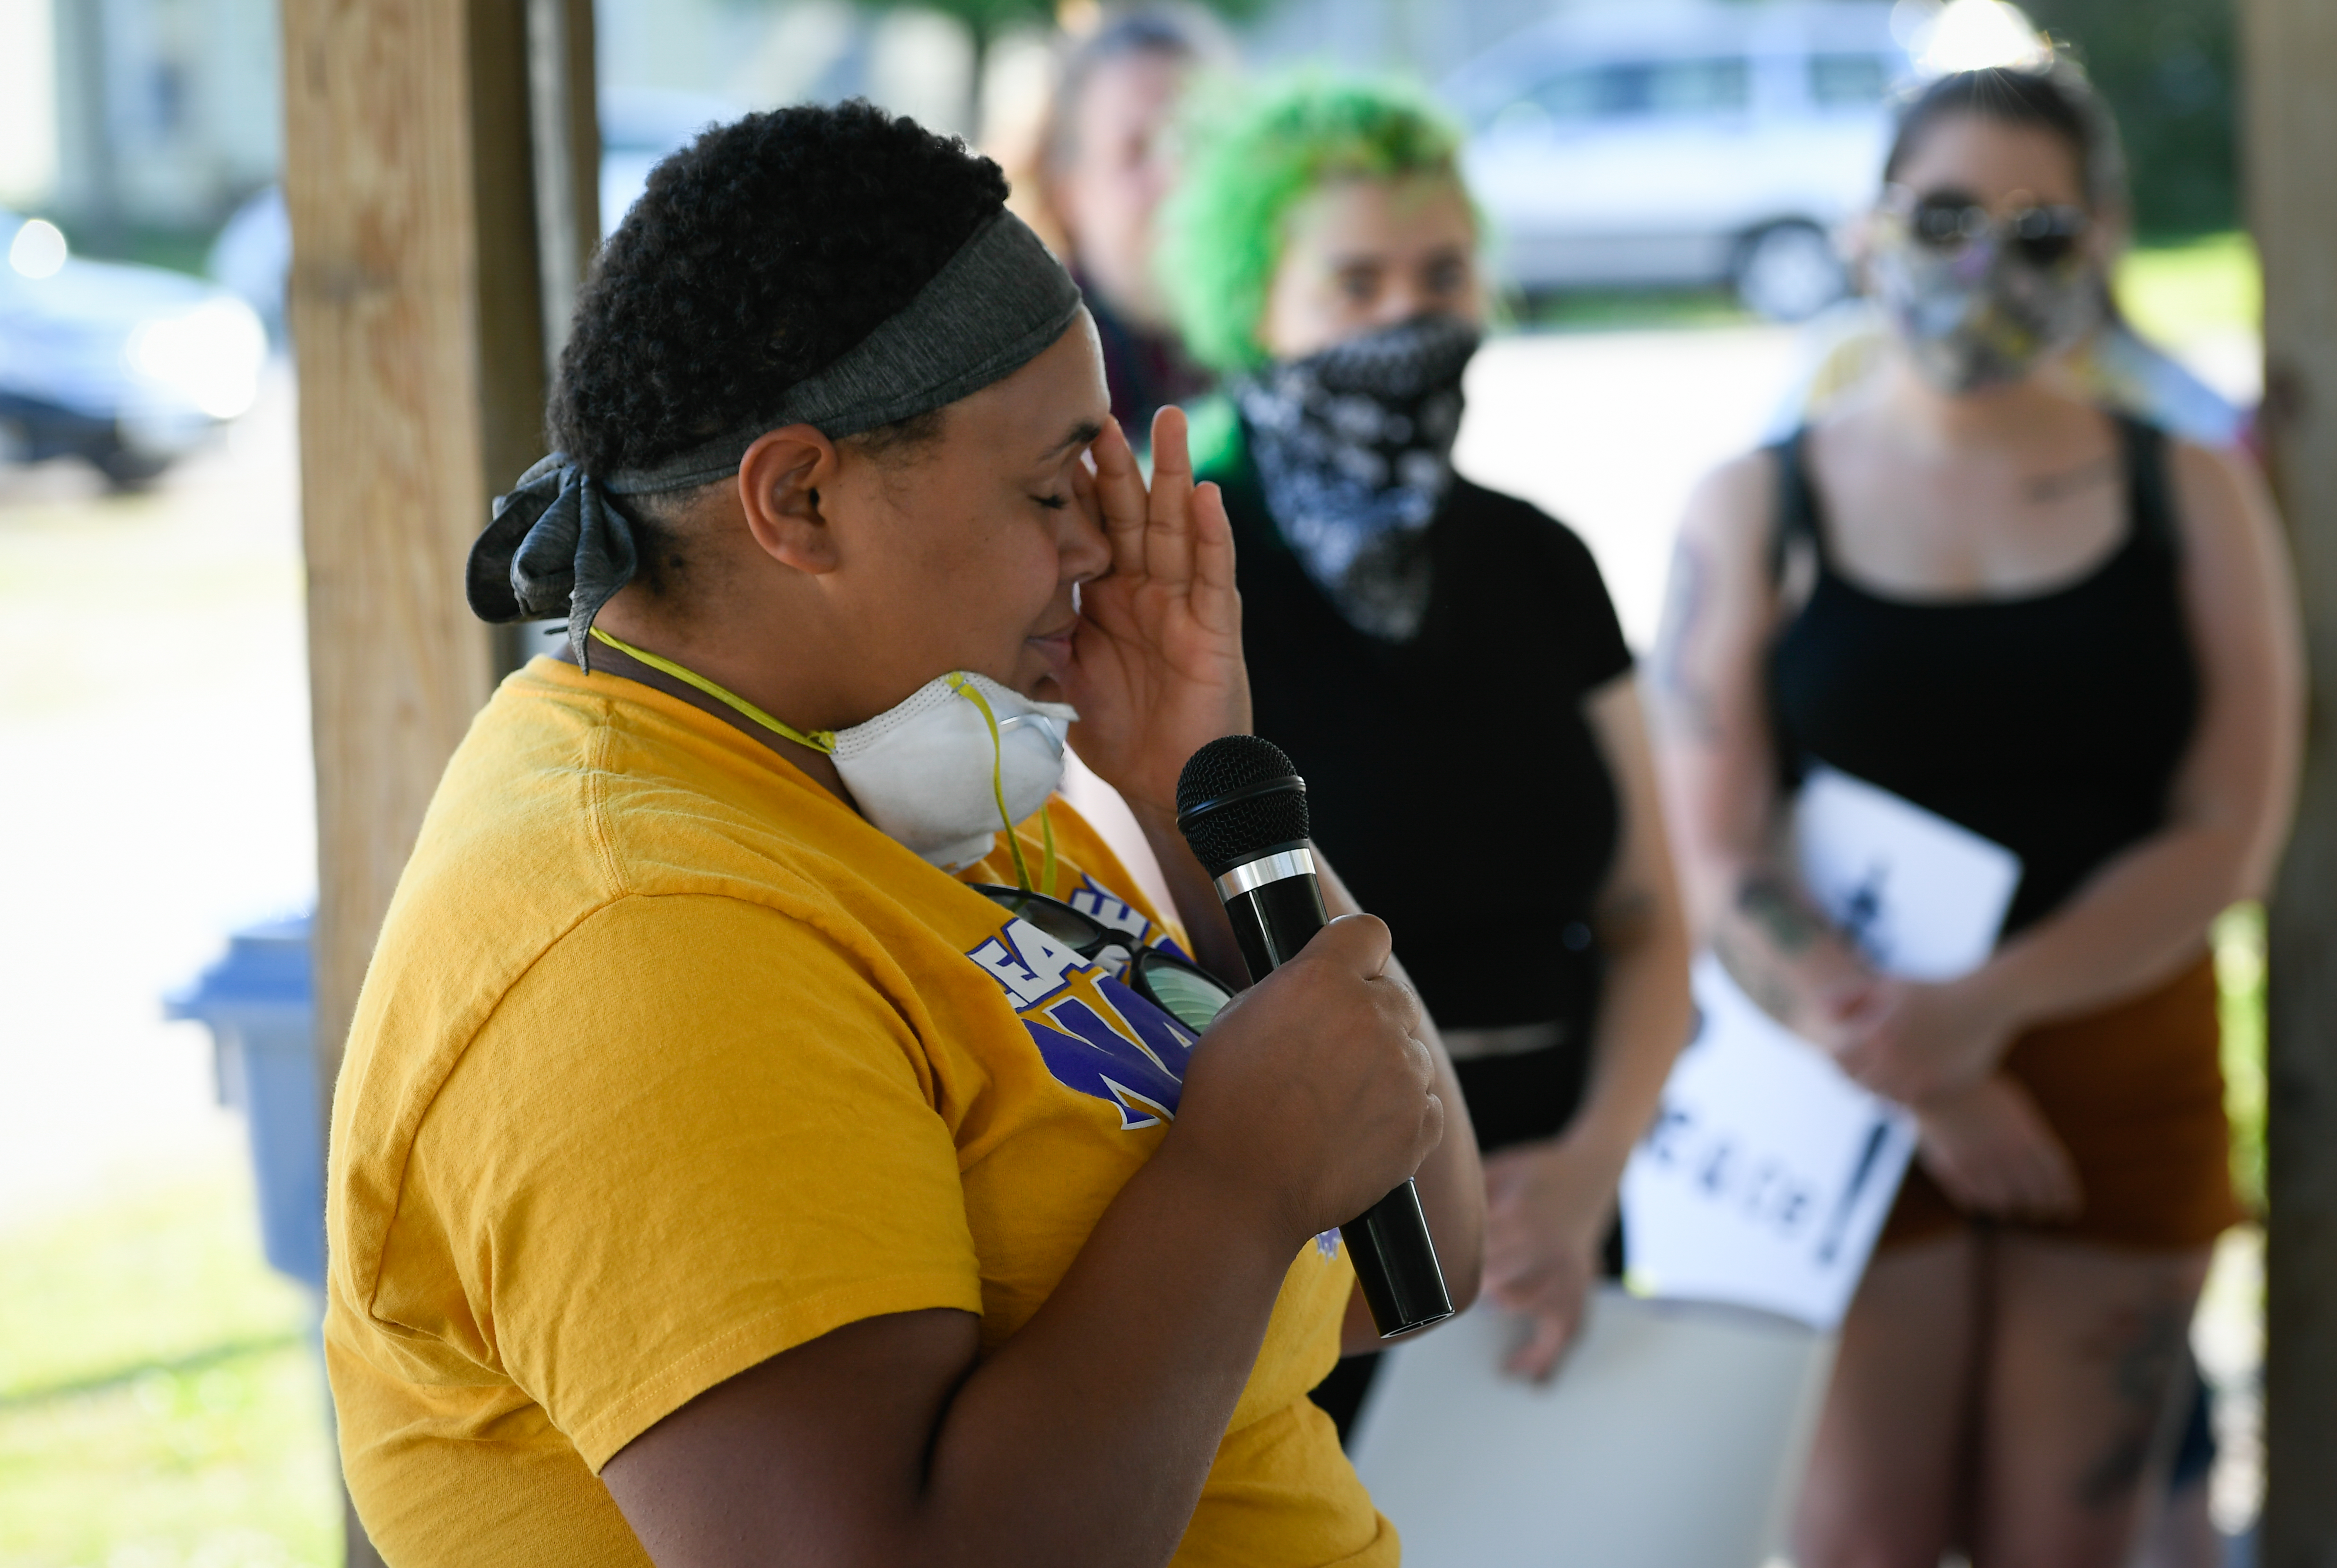 Iliawna Hook, a junior at Mercer County High School, composes herself after giving an emotional speech about her experiences with racism during school events.